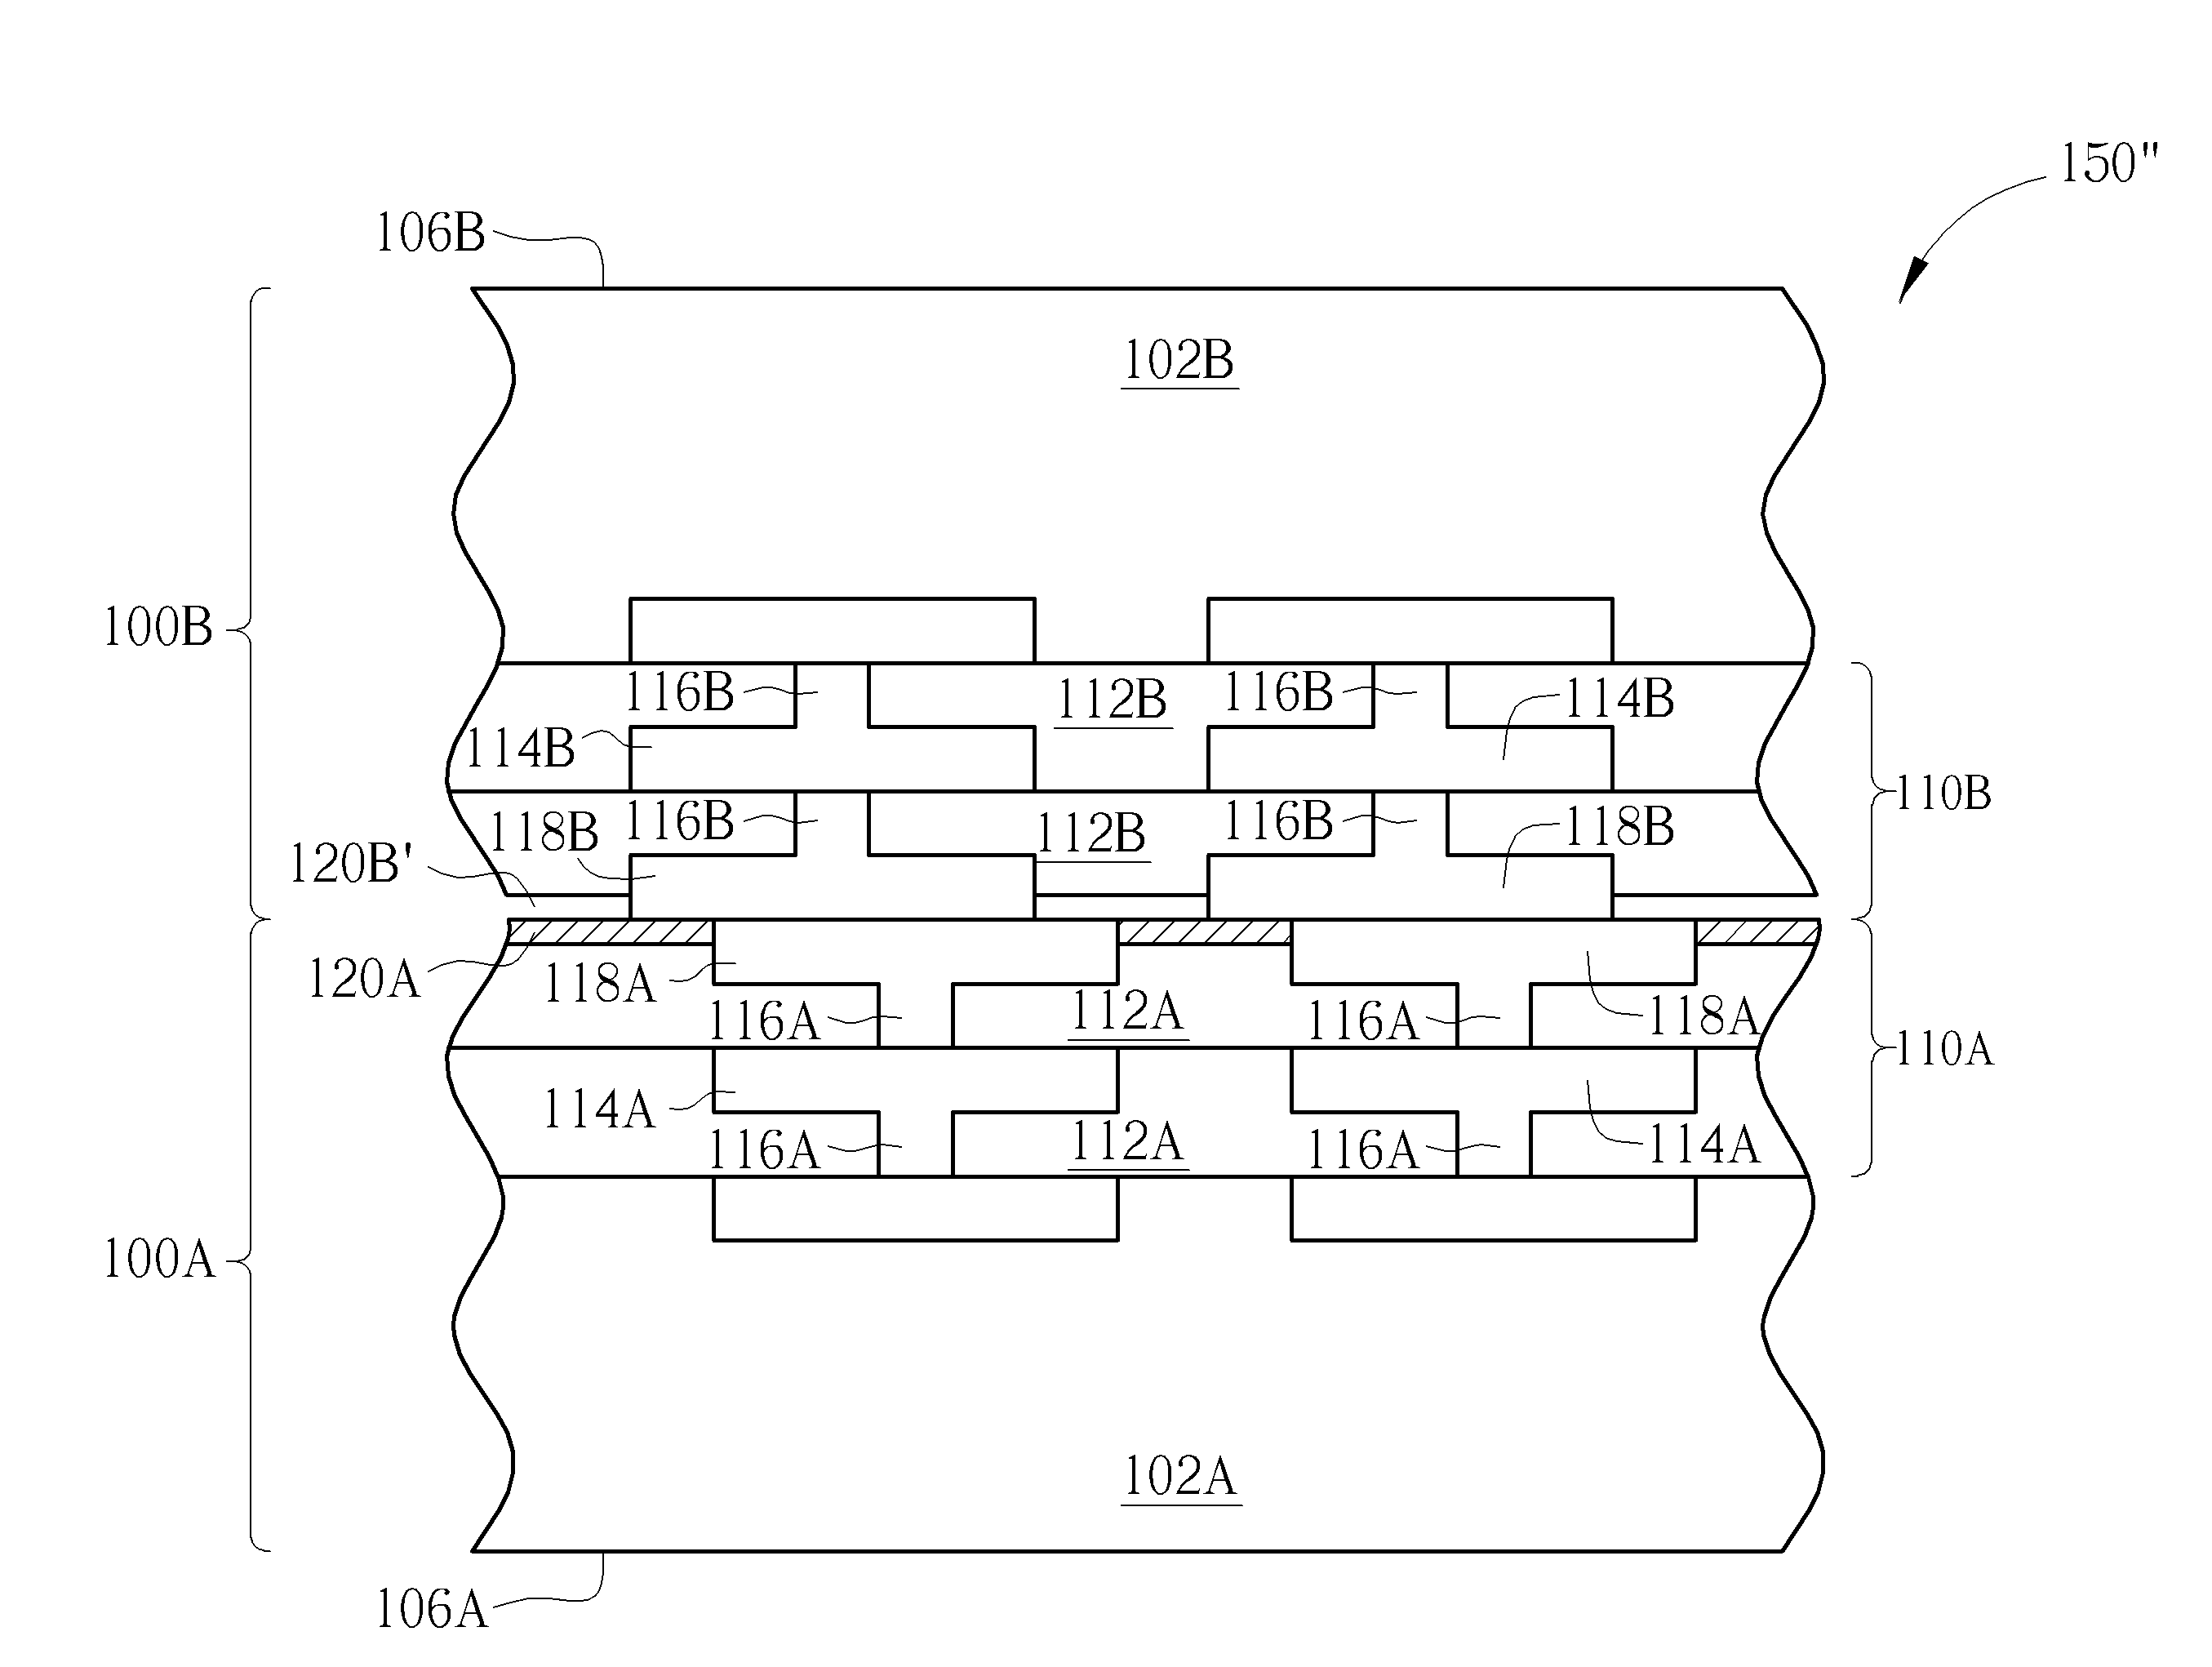 Stacked semiconductor structure